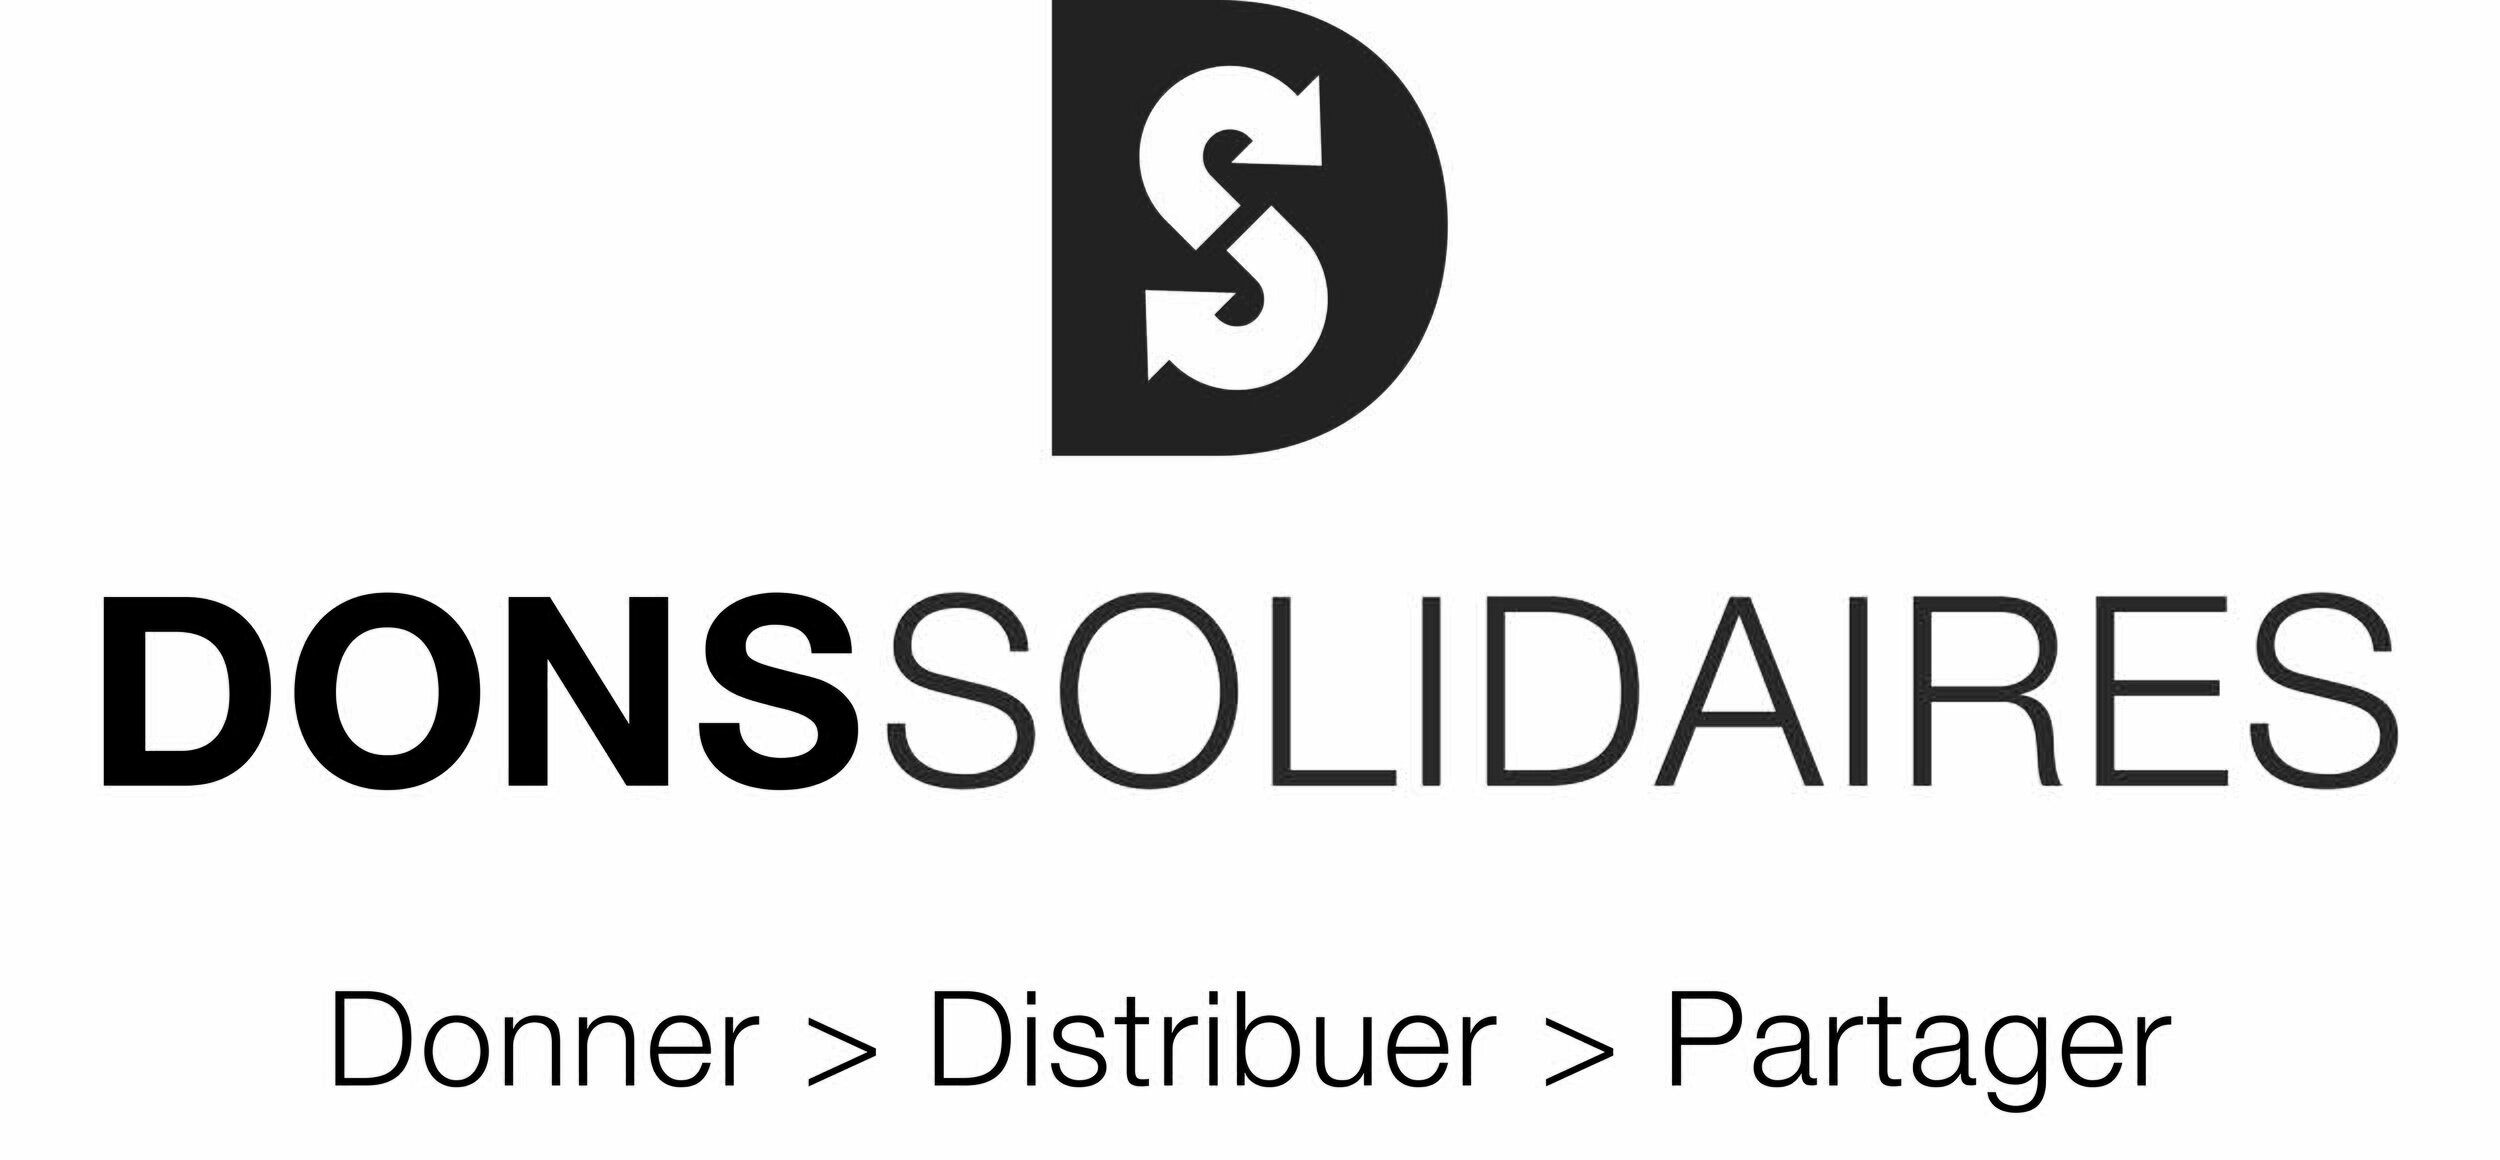 LOGO_DONS-SOLIDAIRES_HD.jpg